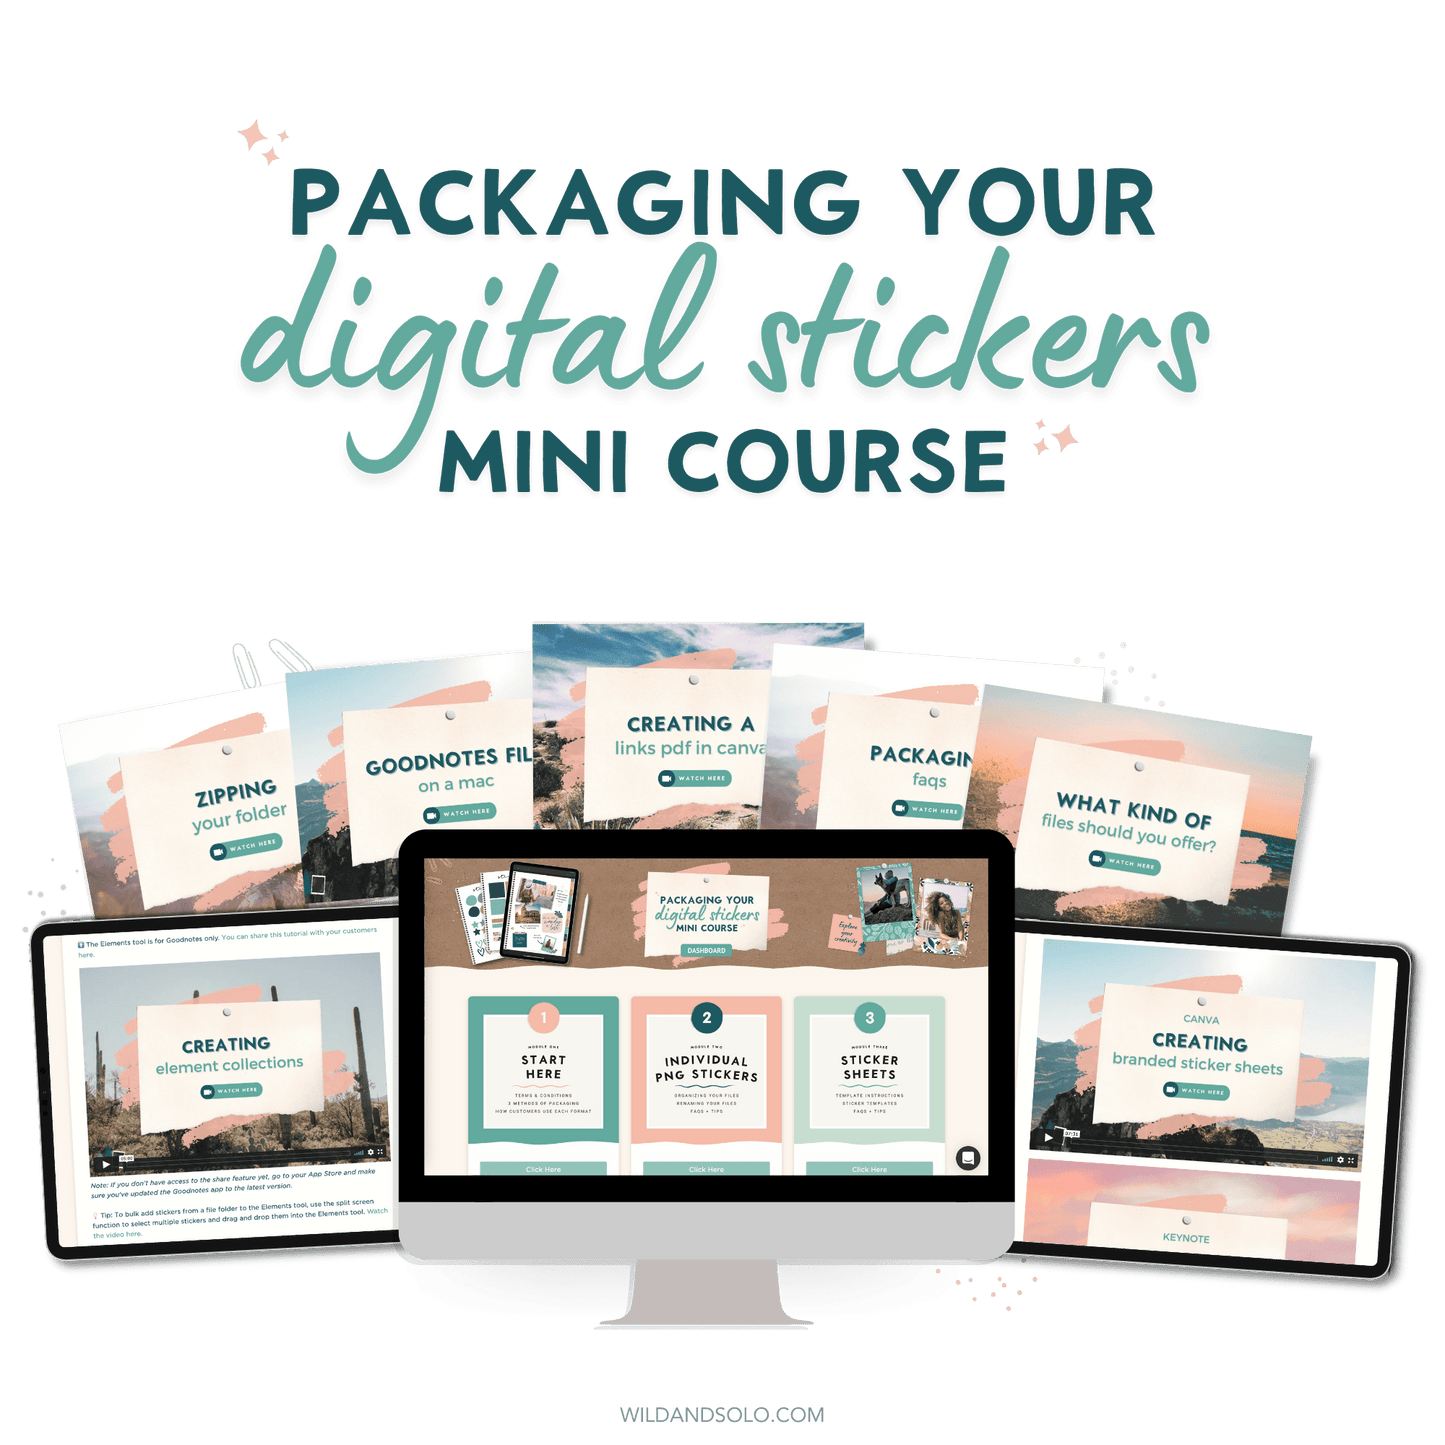 Packaging Your Digital Stickers Mini Course shown on a laptop